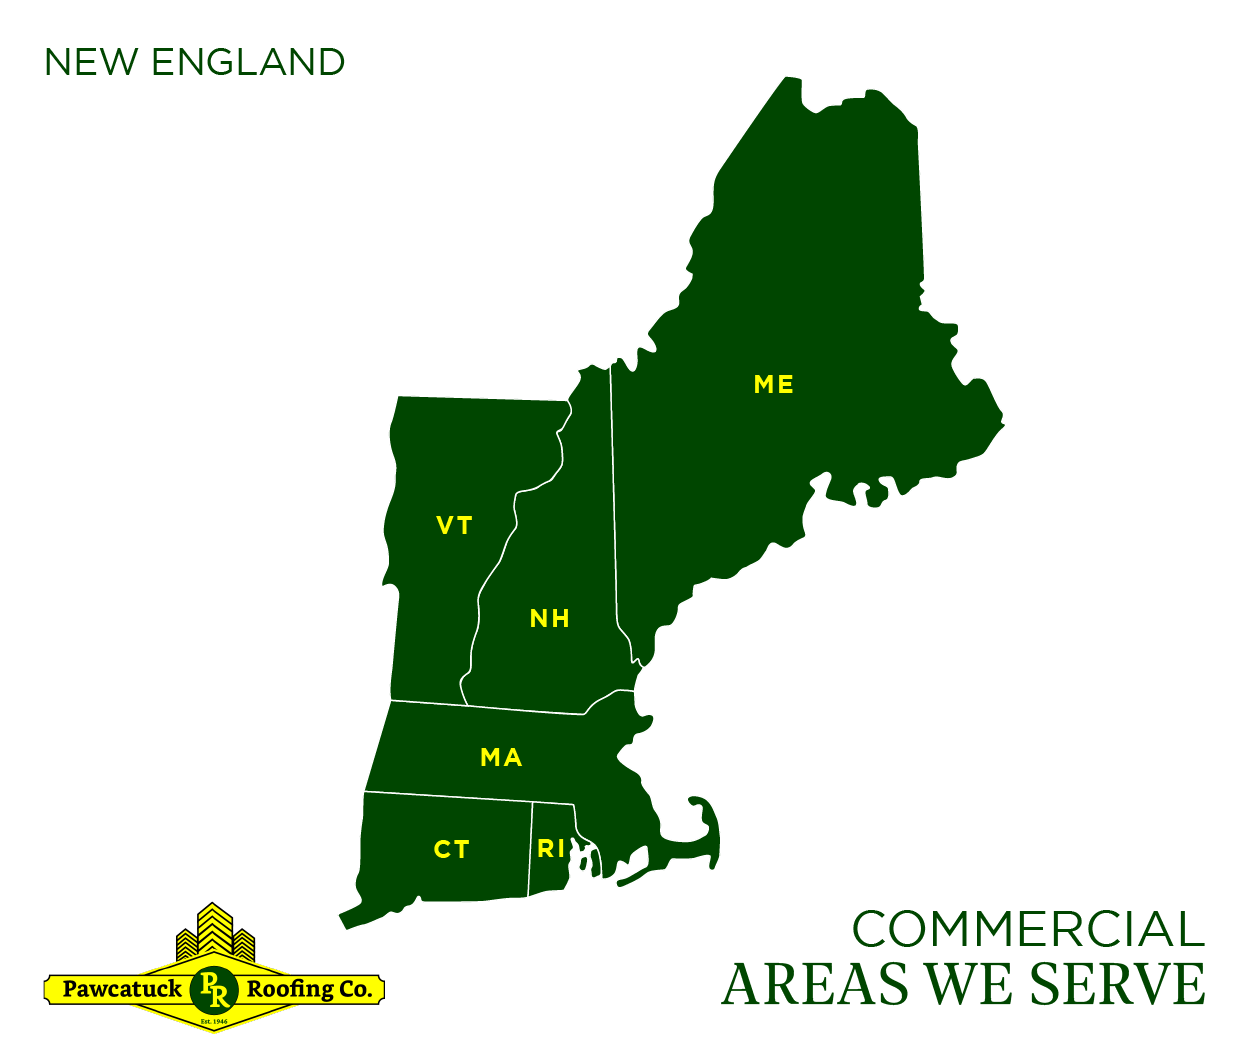 Commercial areas we serve all of New England